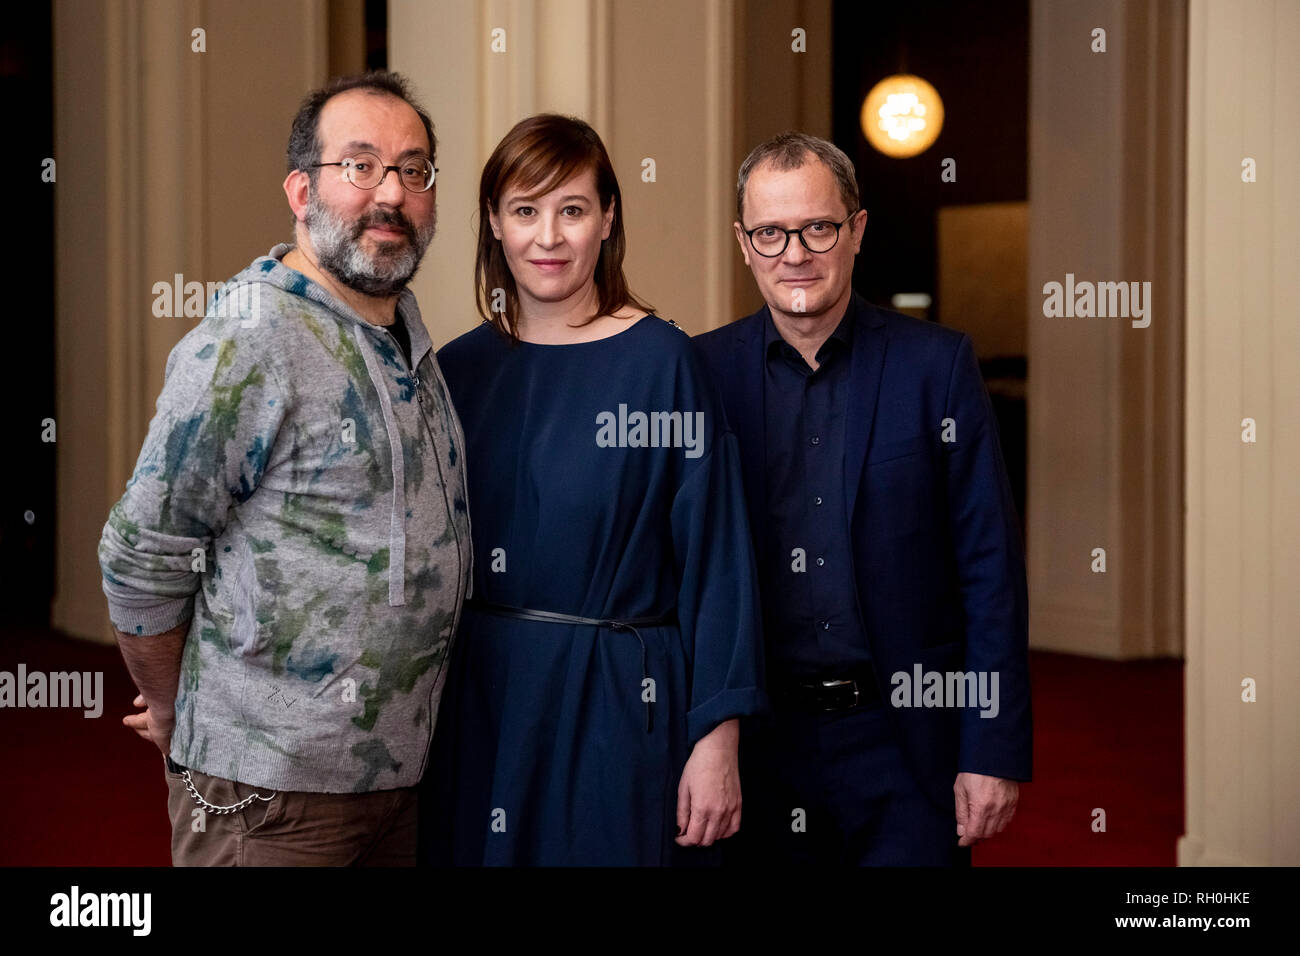 Berlin, Germany. 31st Jan, 2019. Barrie Kosky (l-r), current artistic director and designated in-house director of the Komische Oper Berlin, Susanne Moser, managing director and designated co-director of the Komische Oper Berlin, and Philip Bröking, opera director and designated co-director of the Komische Oper Berlin, will be together for a photo after a press conference on the future of the Komische Oper Berlin. Credit: Christoph Soeder/dpa/Alamy Live News Stock Photo